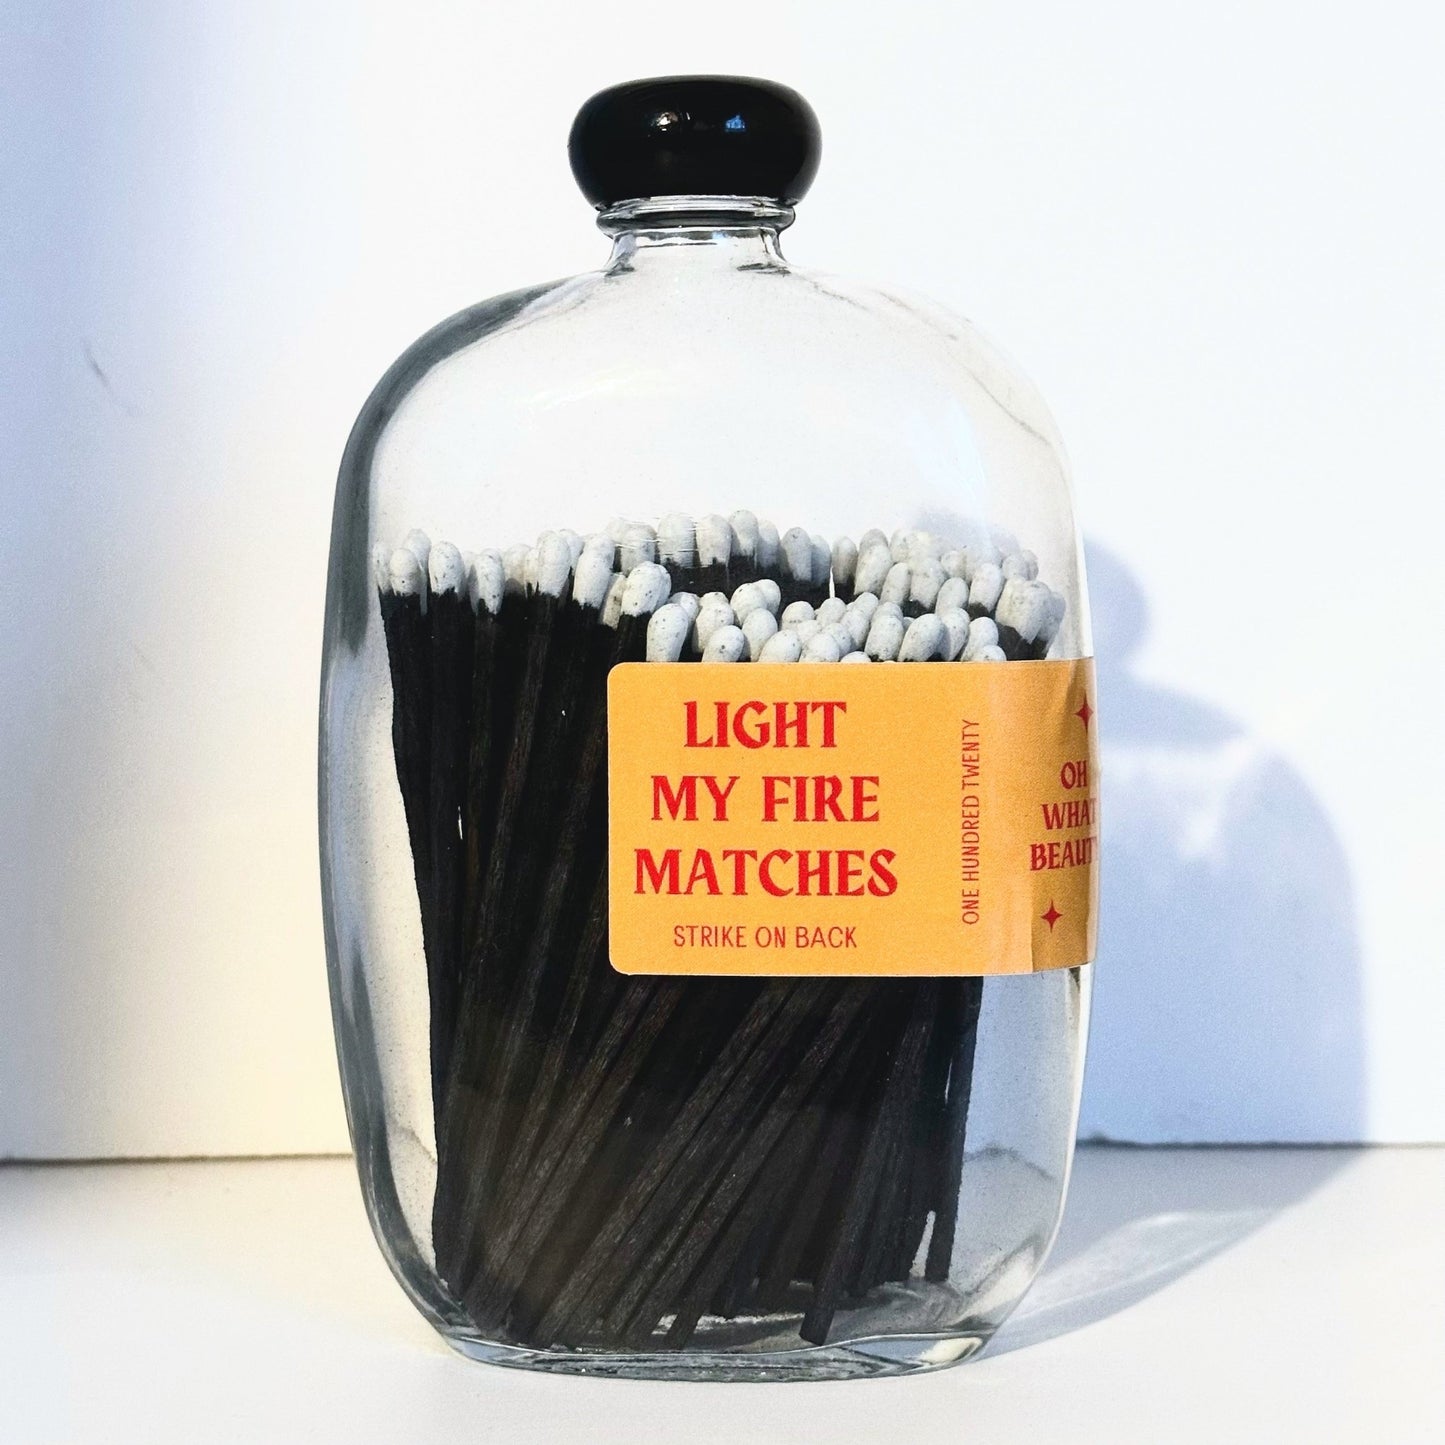 Light My Fire Matches - OH WHAT BEAUTY